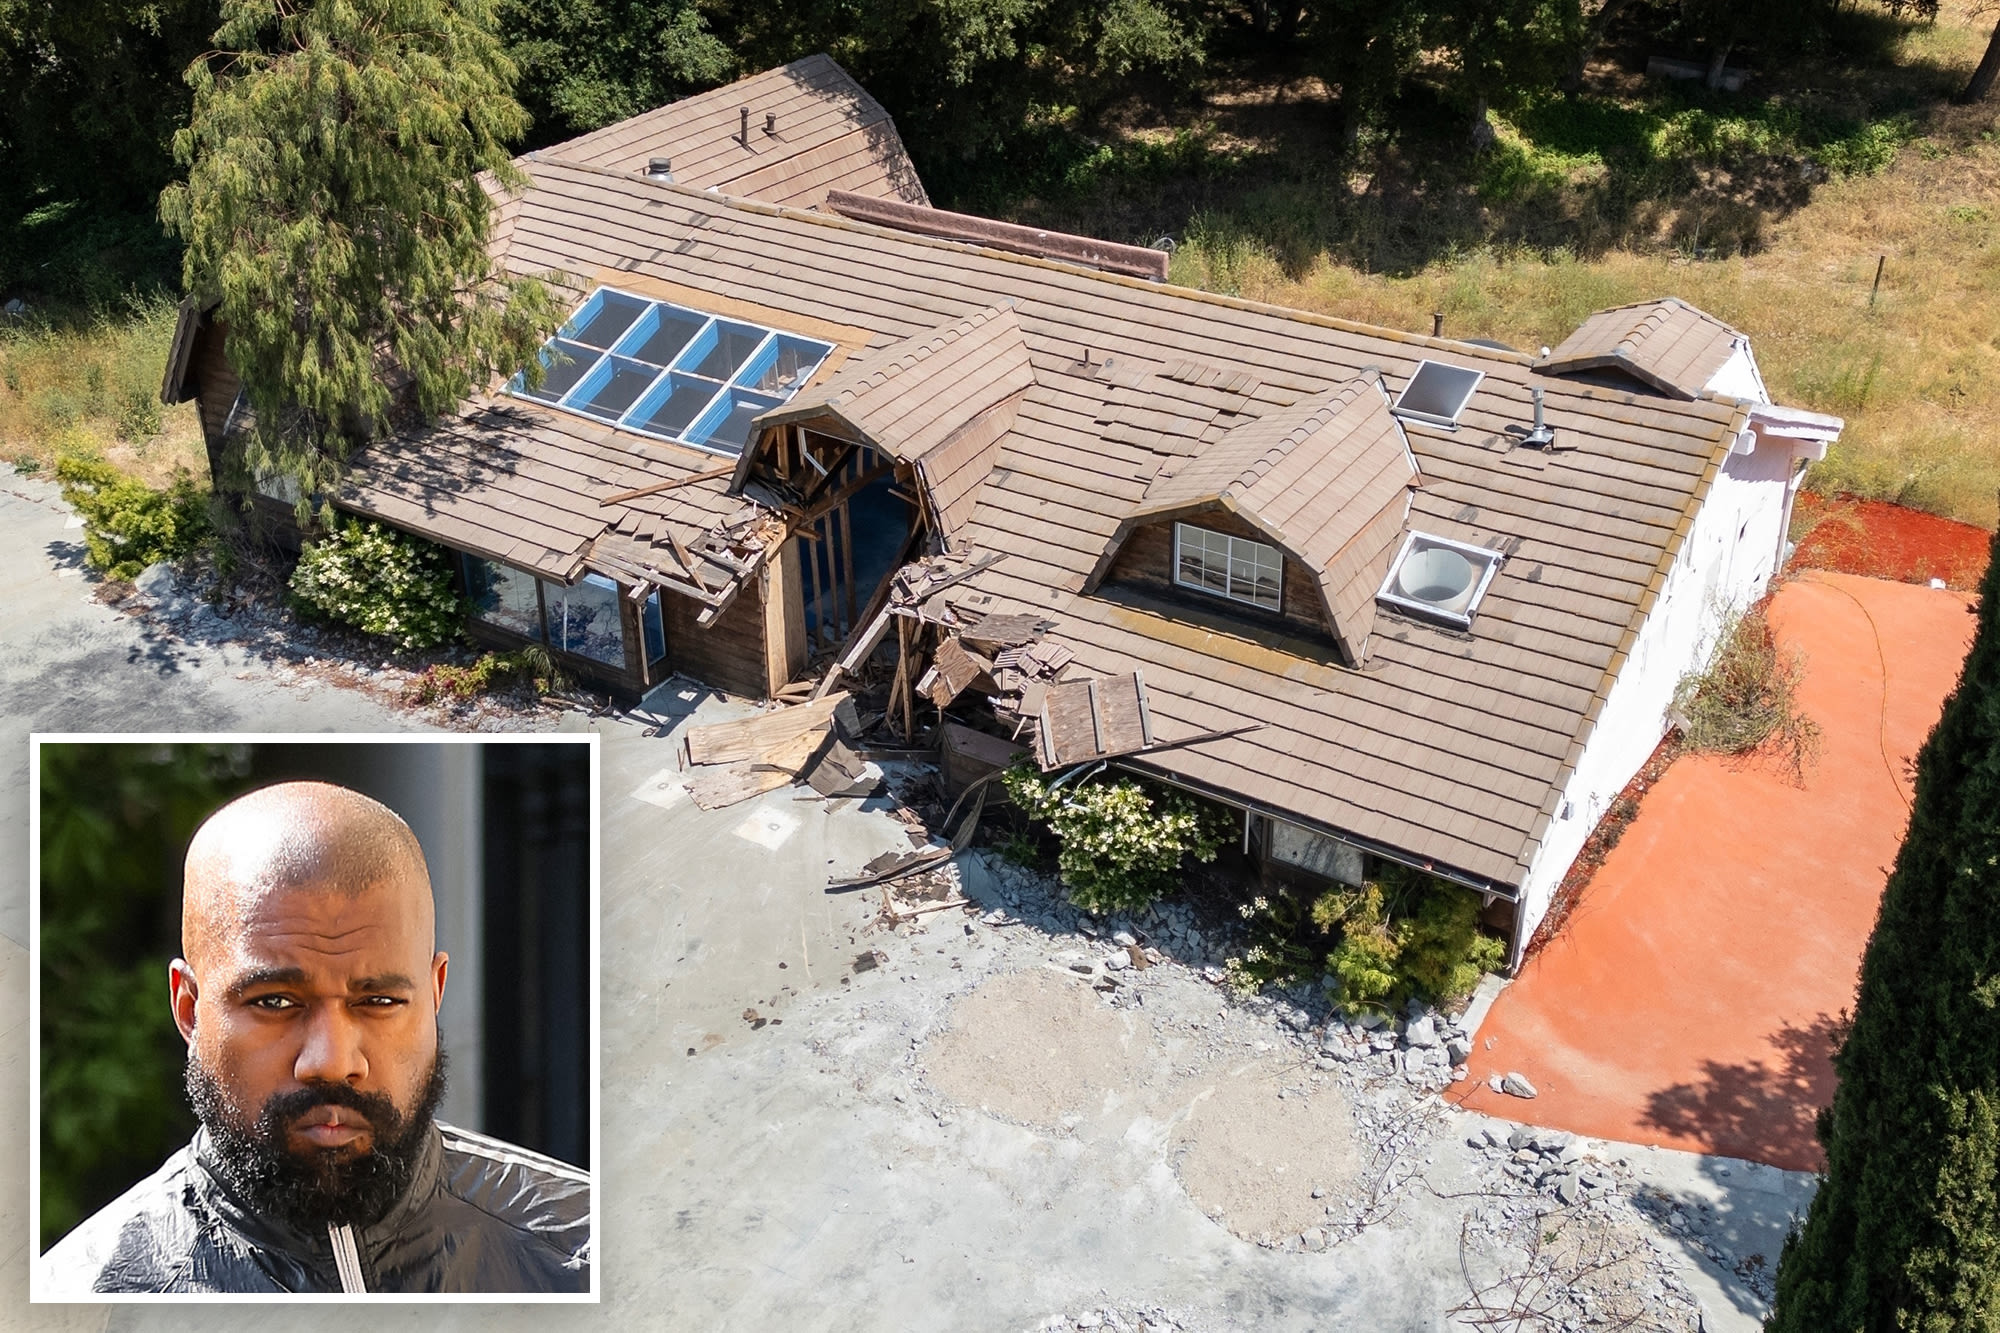 Kanye West’s 300-acre ranch in Calabasas is seen in complete ruins